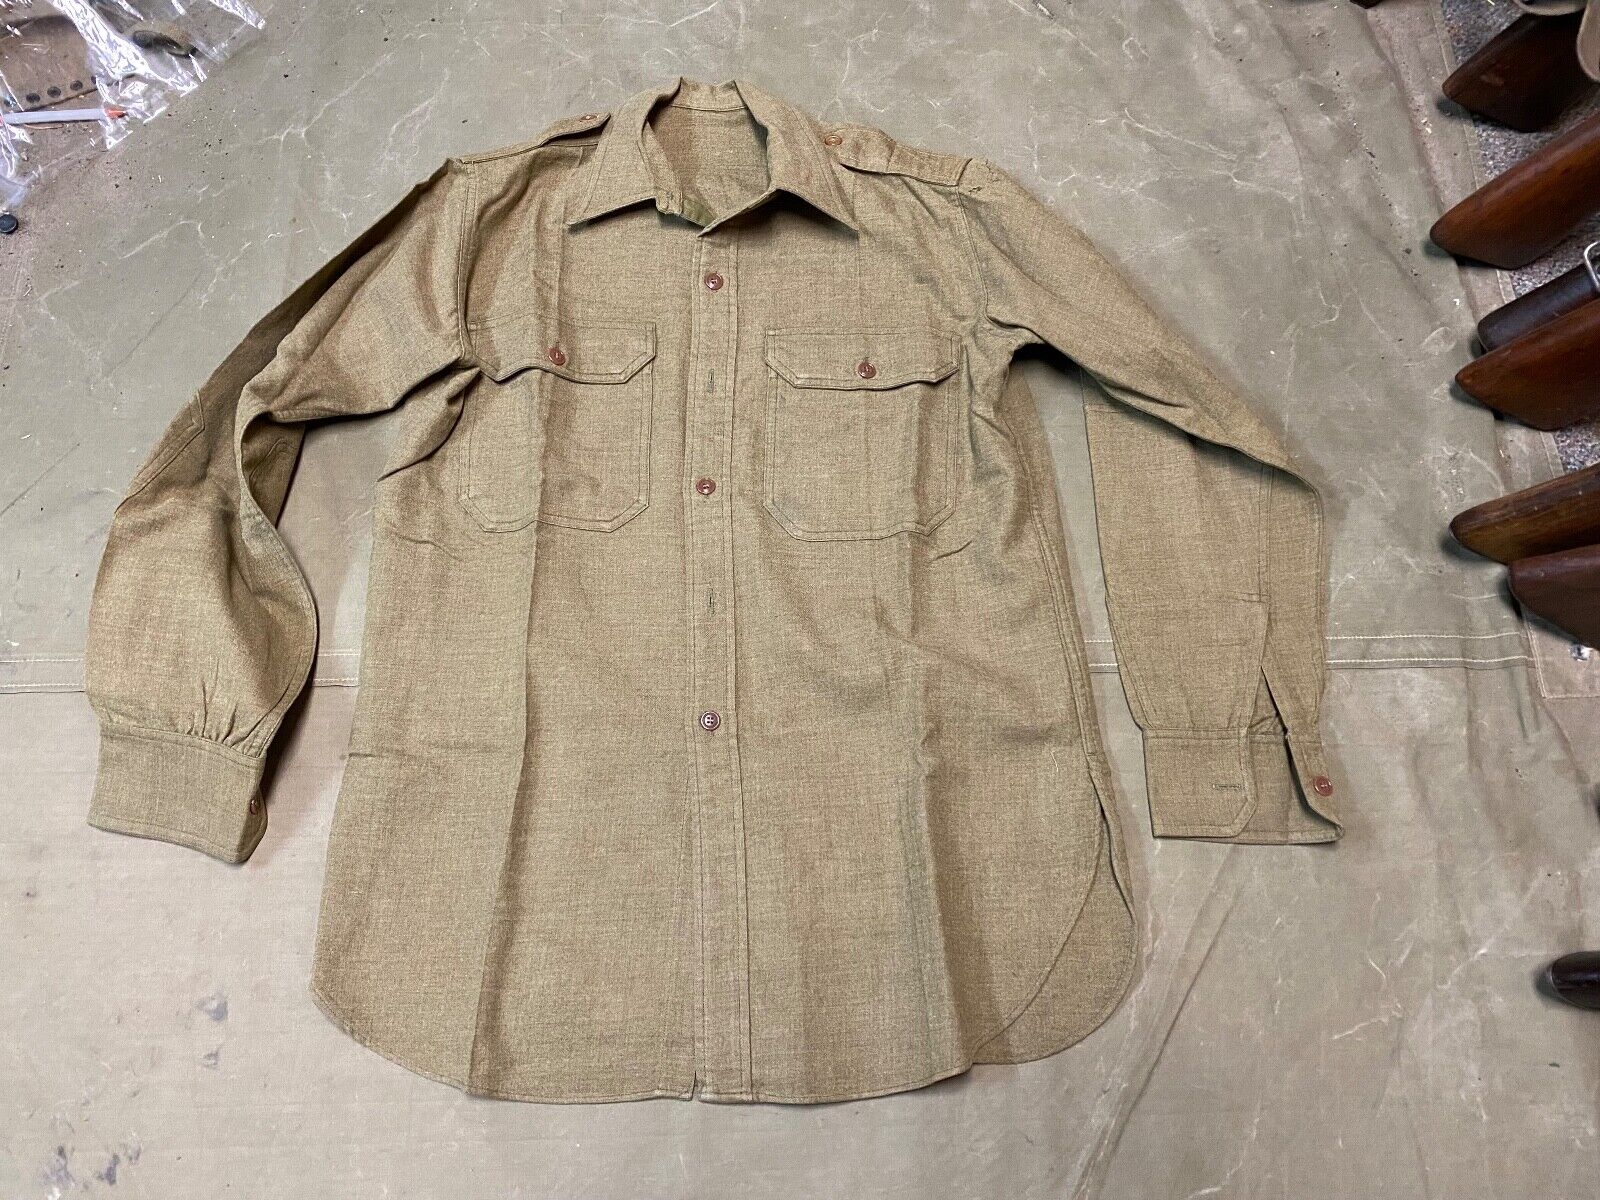 ORIGINAL WWII US ARMY M1937 M37 OFFICER WOOL COMBAT FIELD SHIRT-LARGE/XLARGE 46R